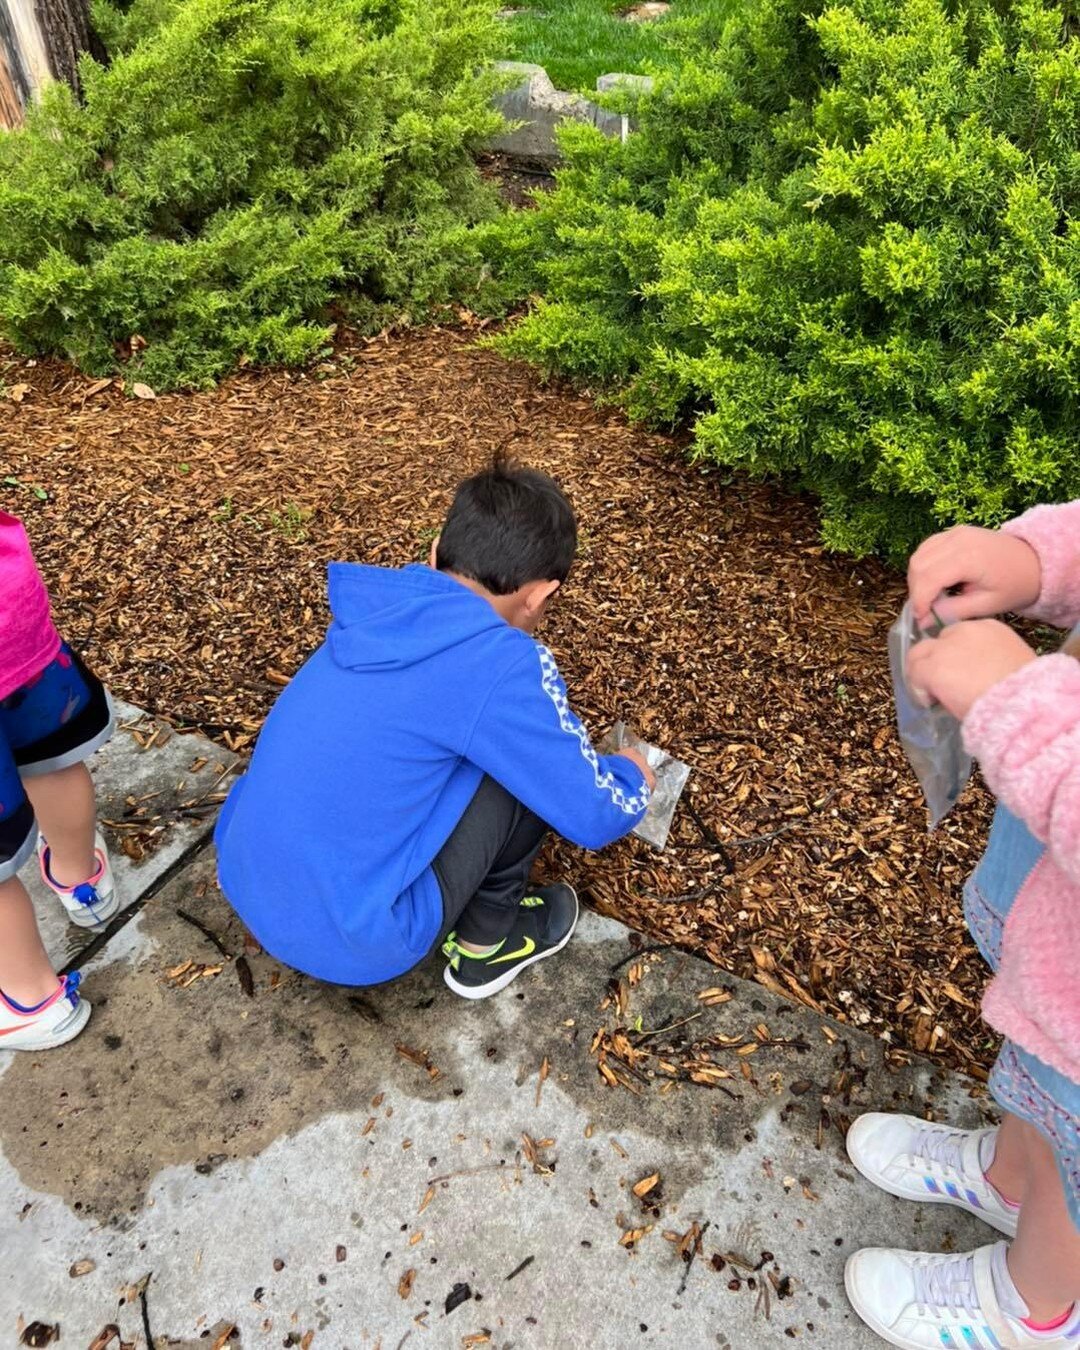 Thursday we had the pleasure of hosting Kindergarten for Kinder Bloom. Students experienced a nature walk collecting leaves, seeds, flowers and twigs. When possible we try to coordinate activities with what children are learning in the classroom. CES